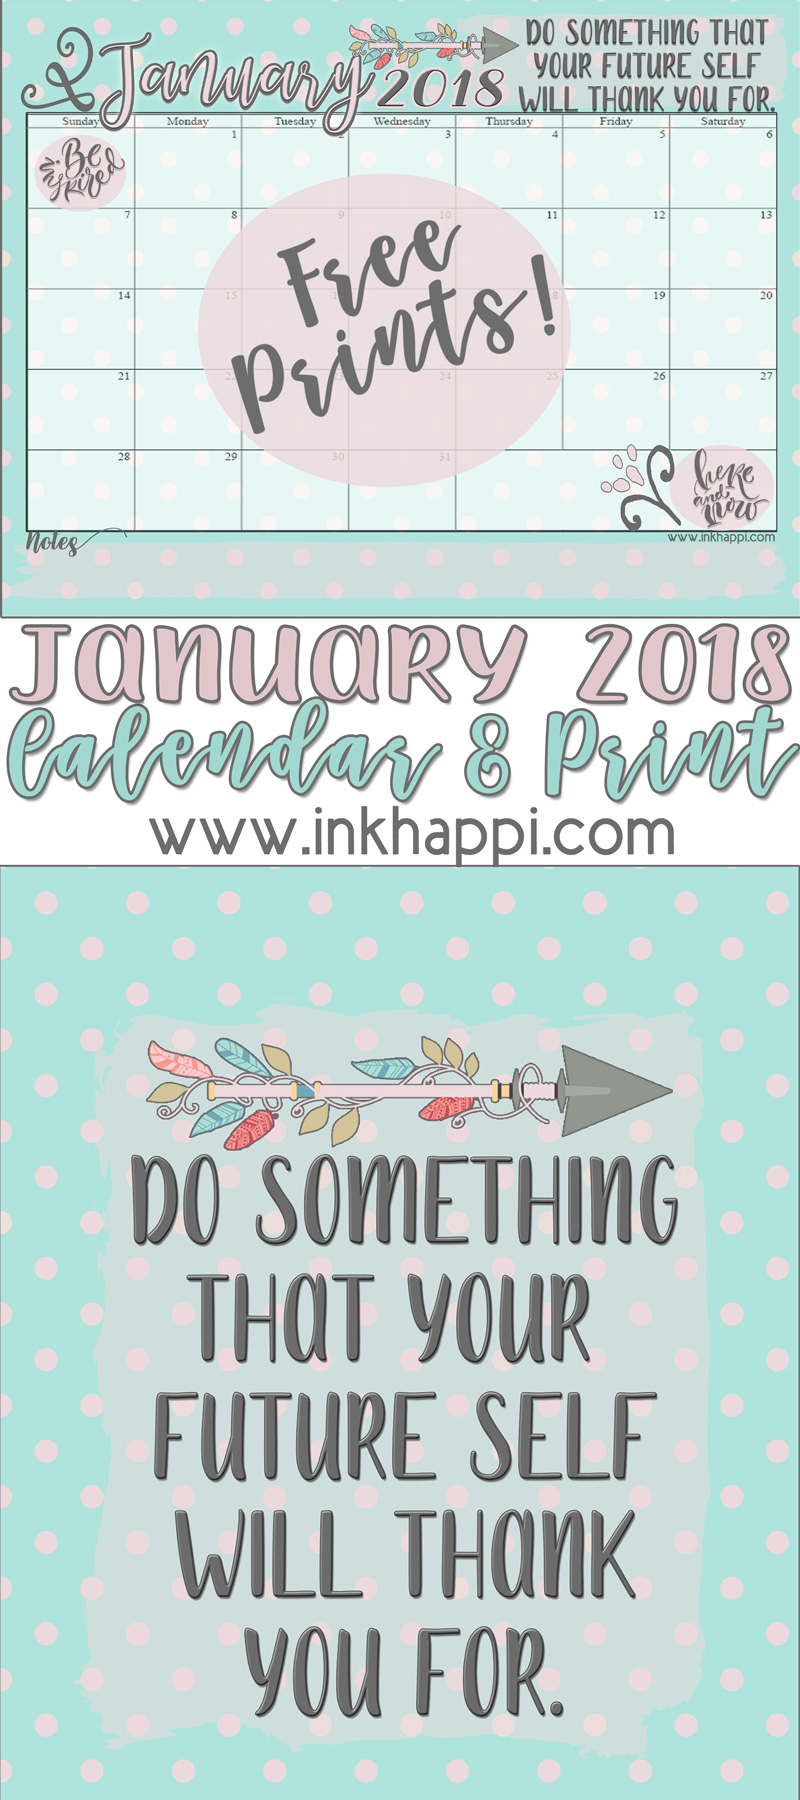 January 2018 Calendar and Motivational Thought - inkhappi